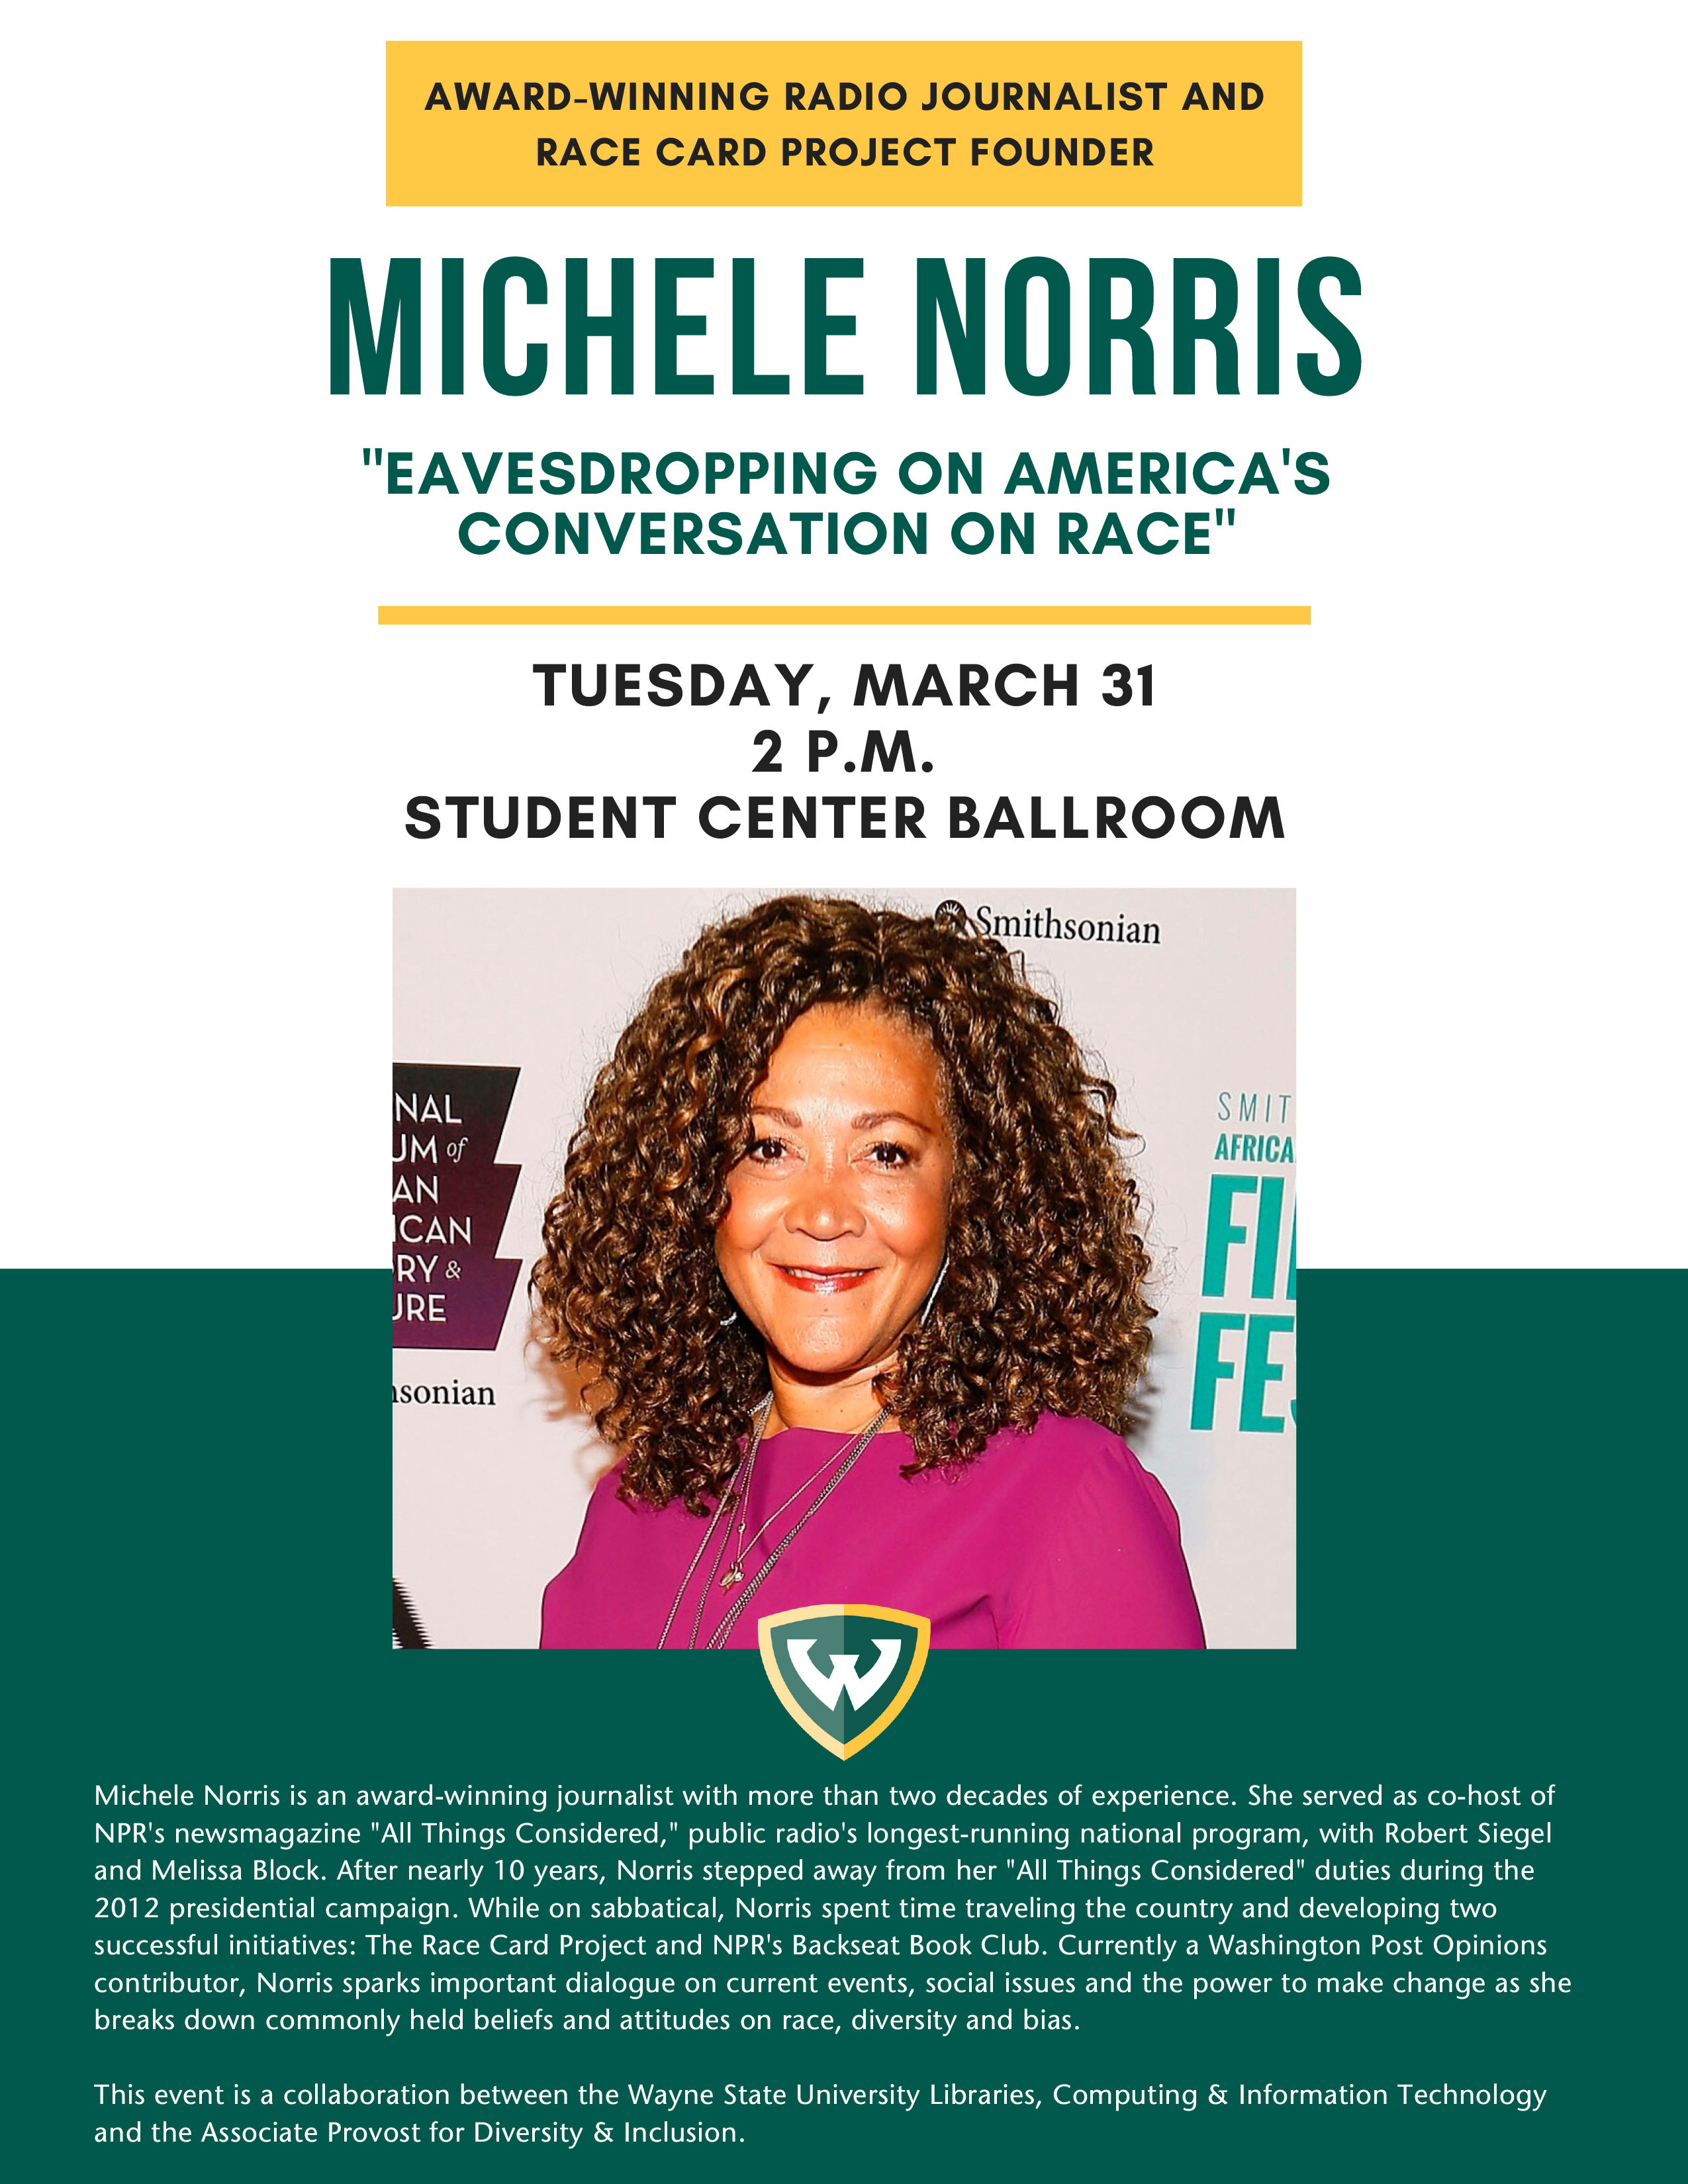 Michele Norris: Eavesdropping on America's Conversation on Race